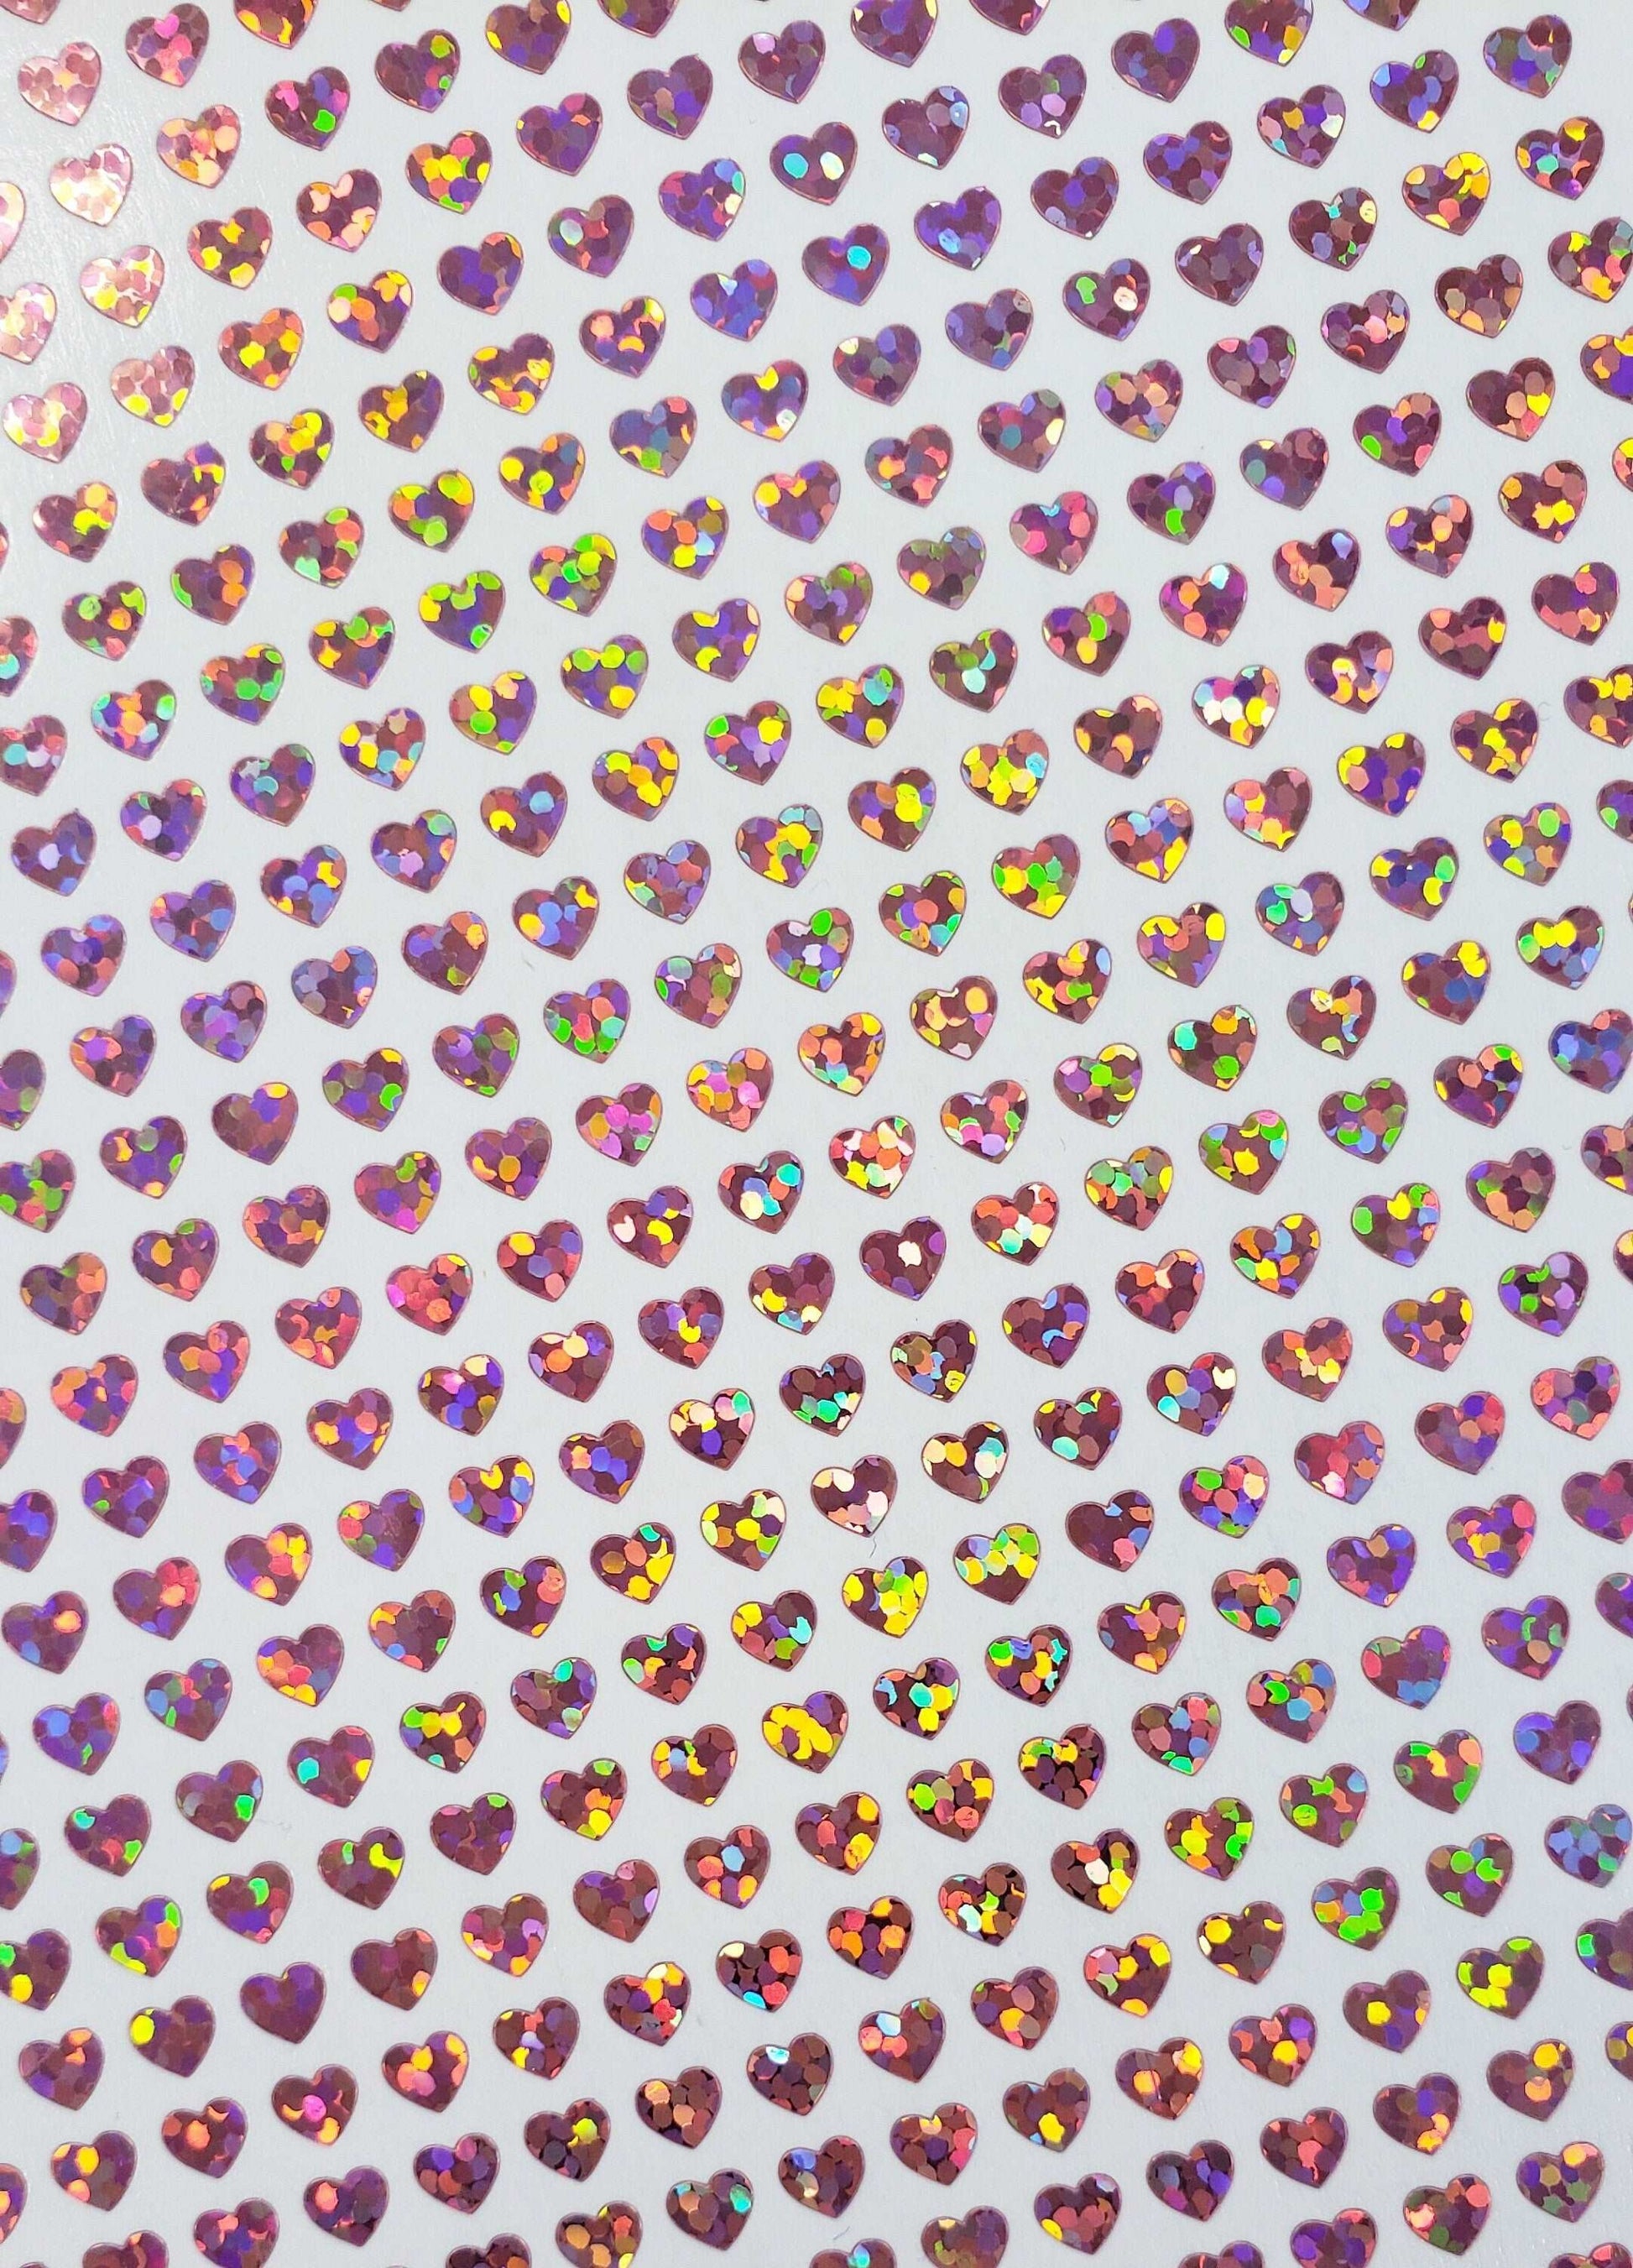 Pink Heart Stickers, set of 640 extra small pink glitter heart stickers for bullet journals, notebooks, nail art, toploader photocards